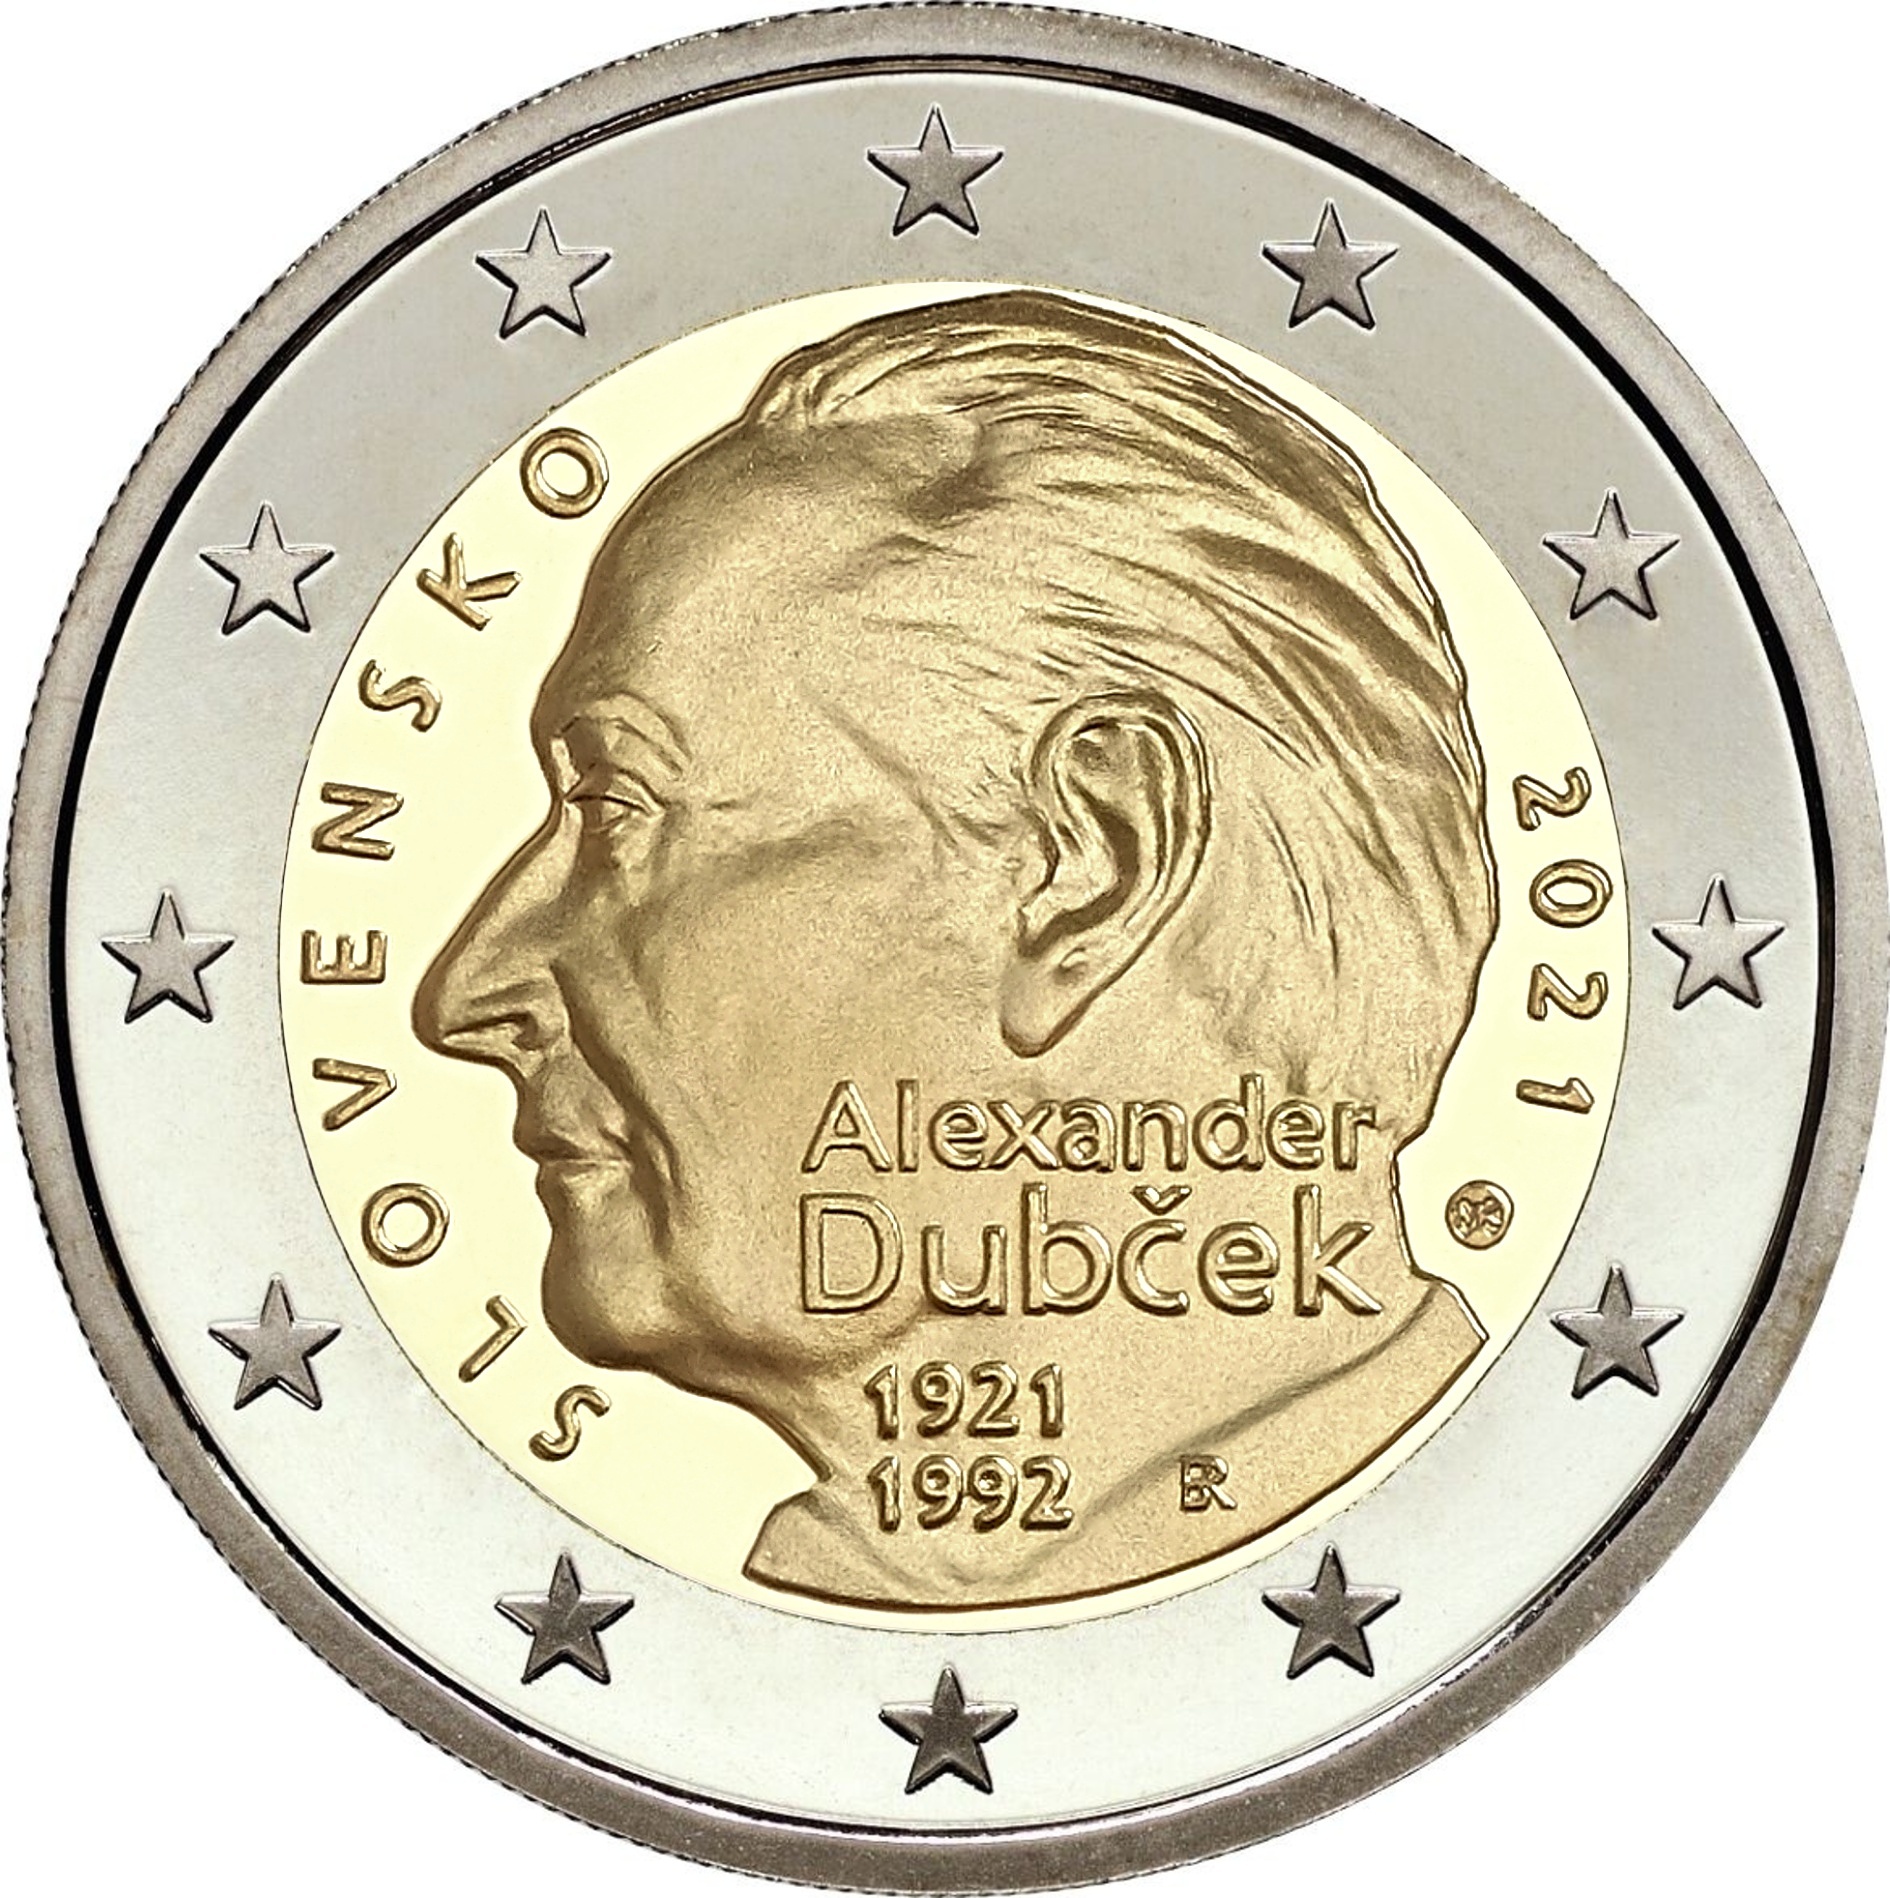 The national side of the commemorative euro coin 